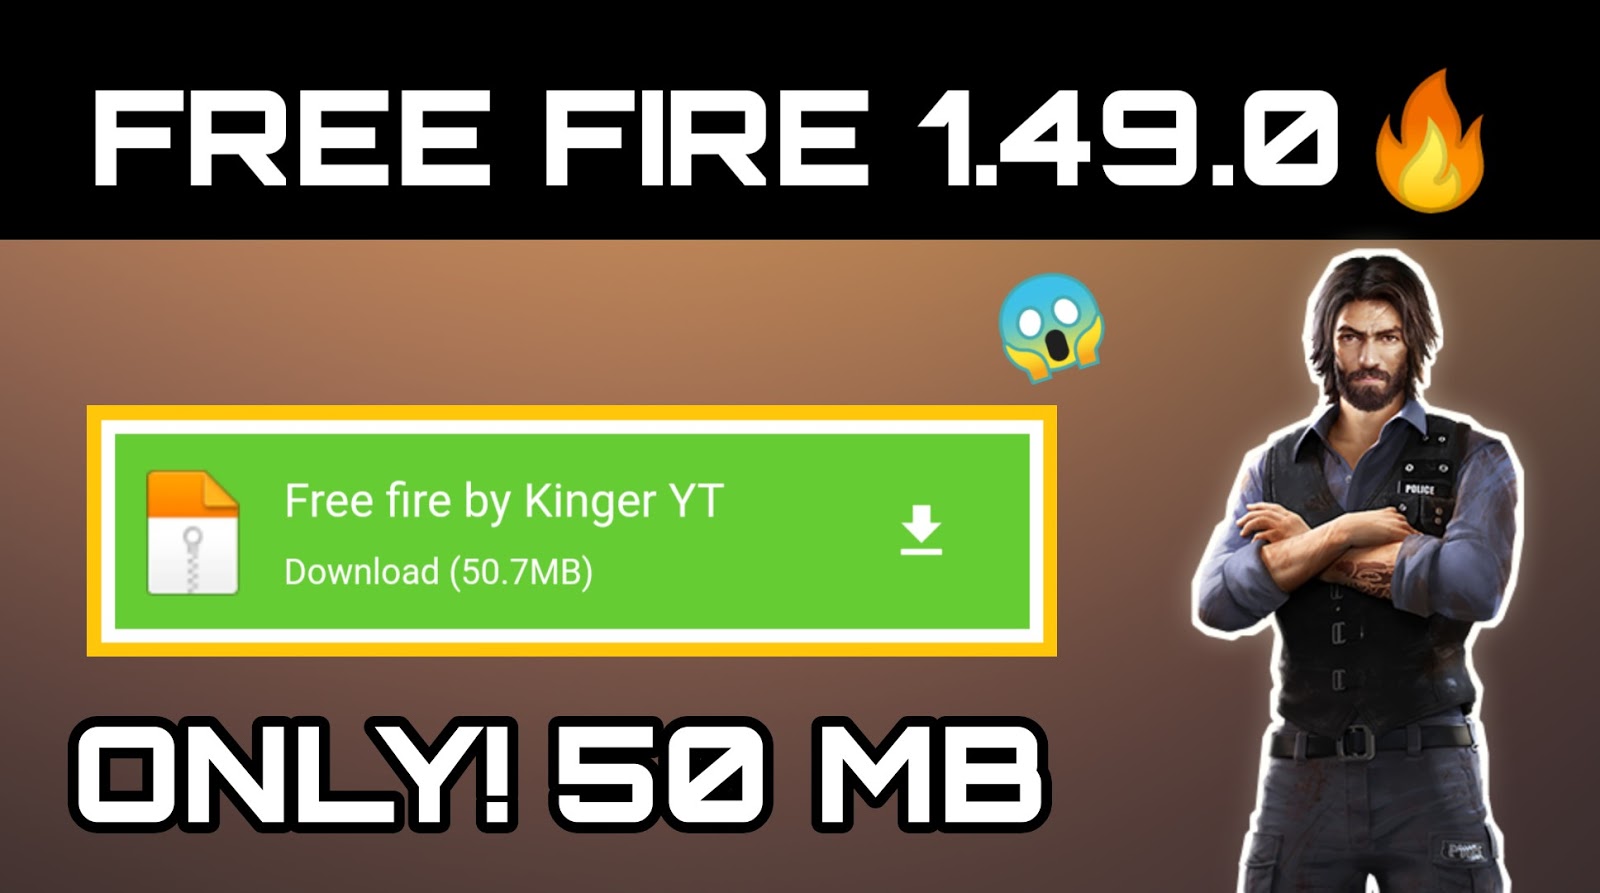 50 Mb Download Free Fire 1 49 0 Highly Compressed On Android Kinger Yt